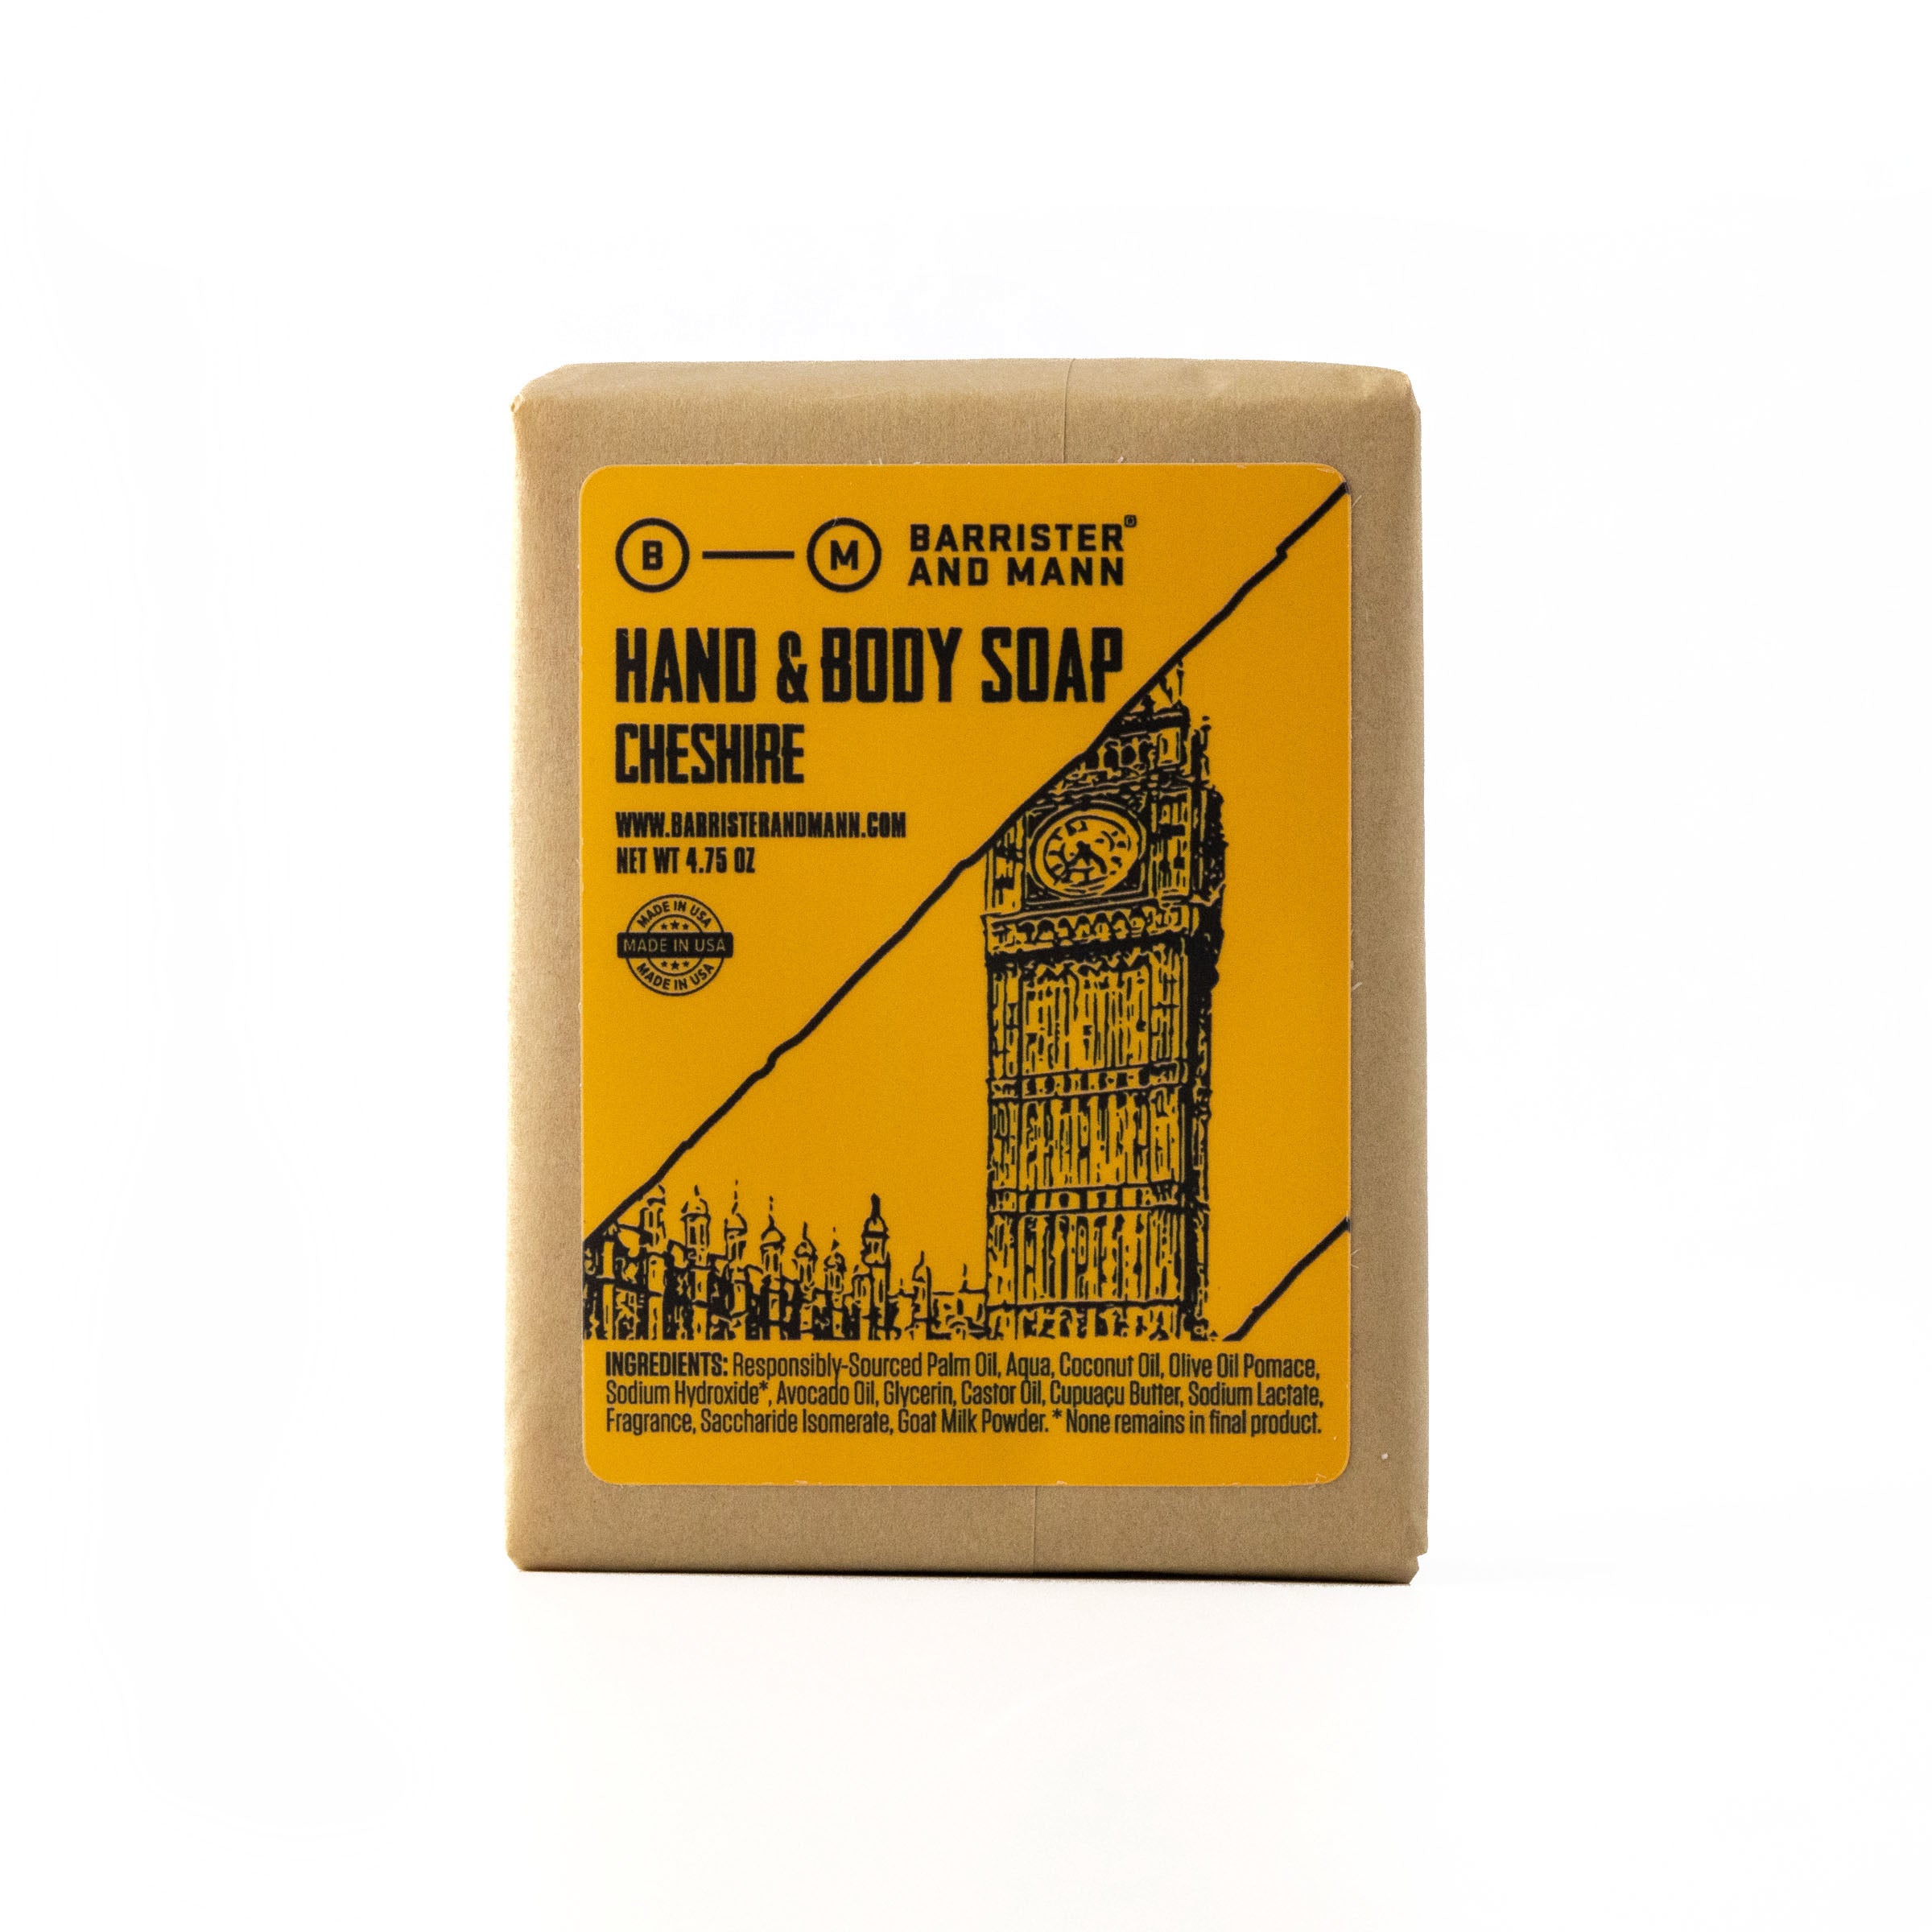 Hand &amp; Body Soap: Cheshire - Barrister and Mann LLC